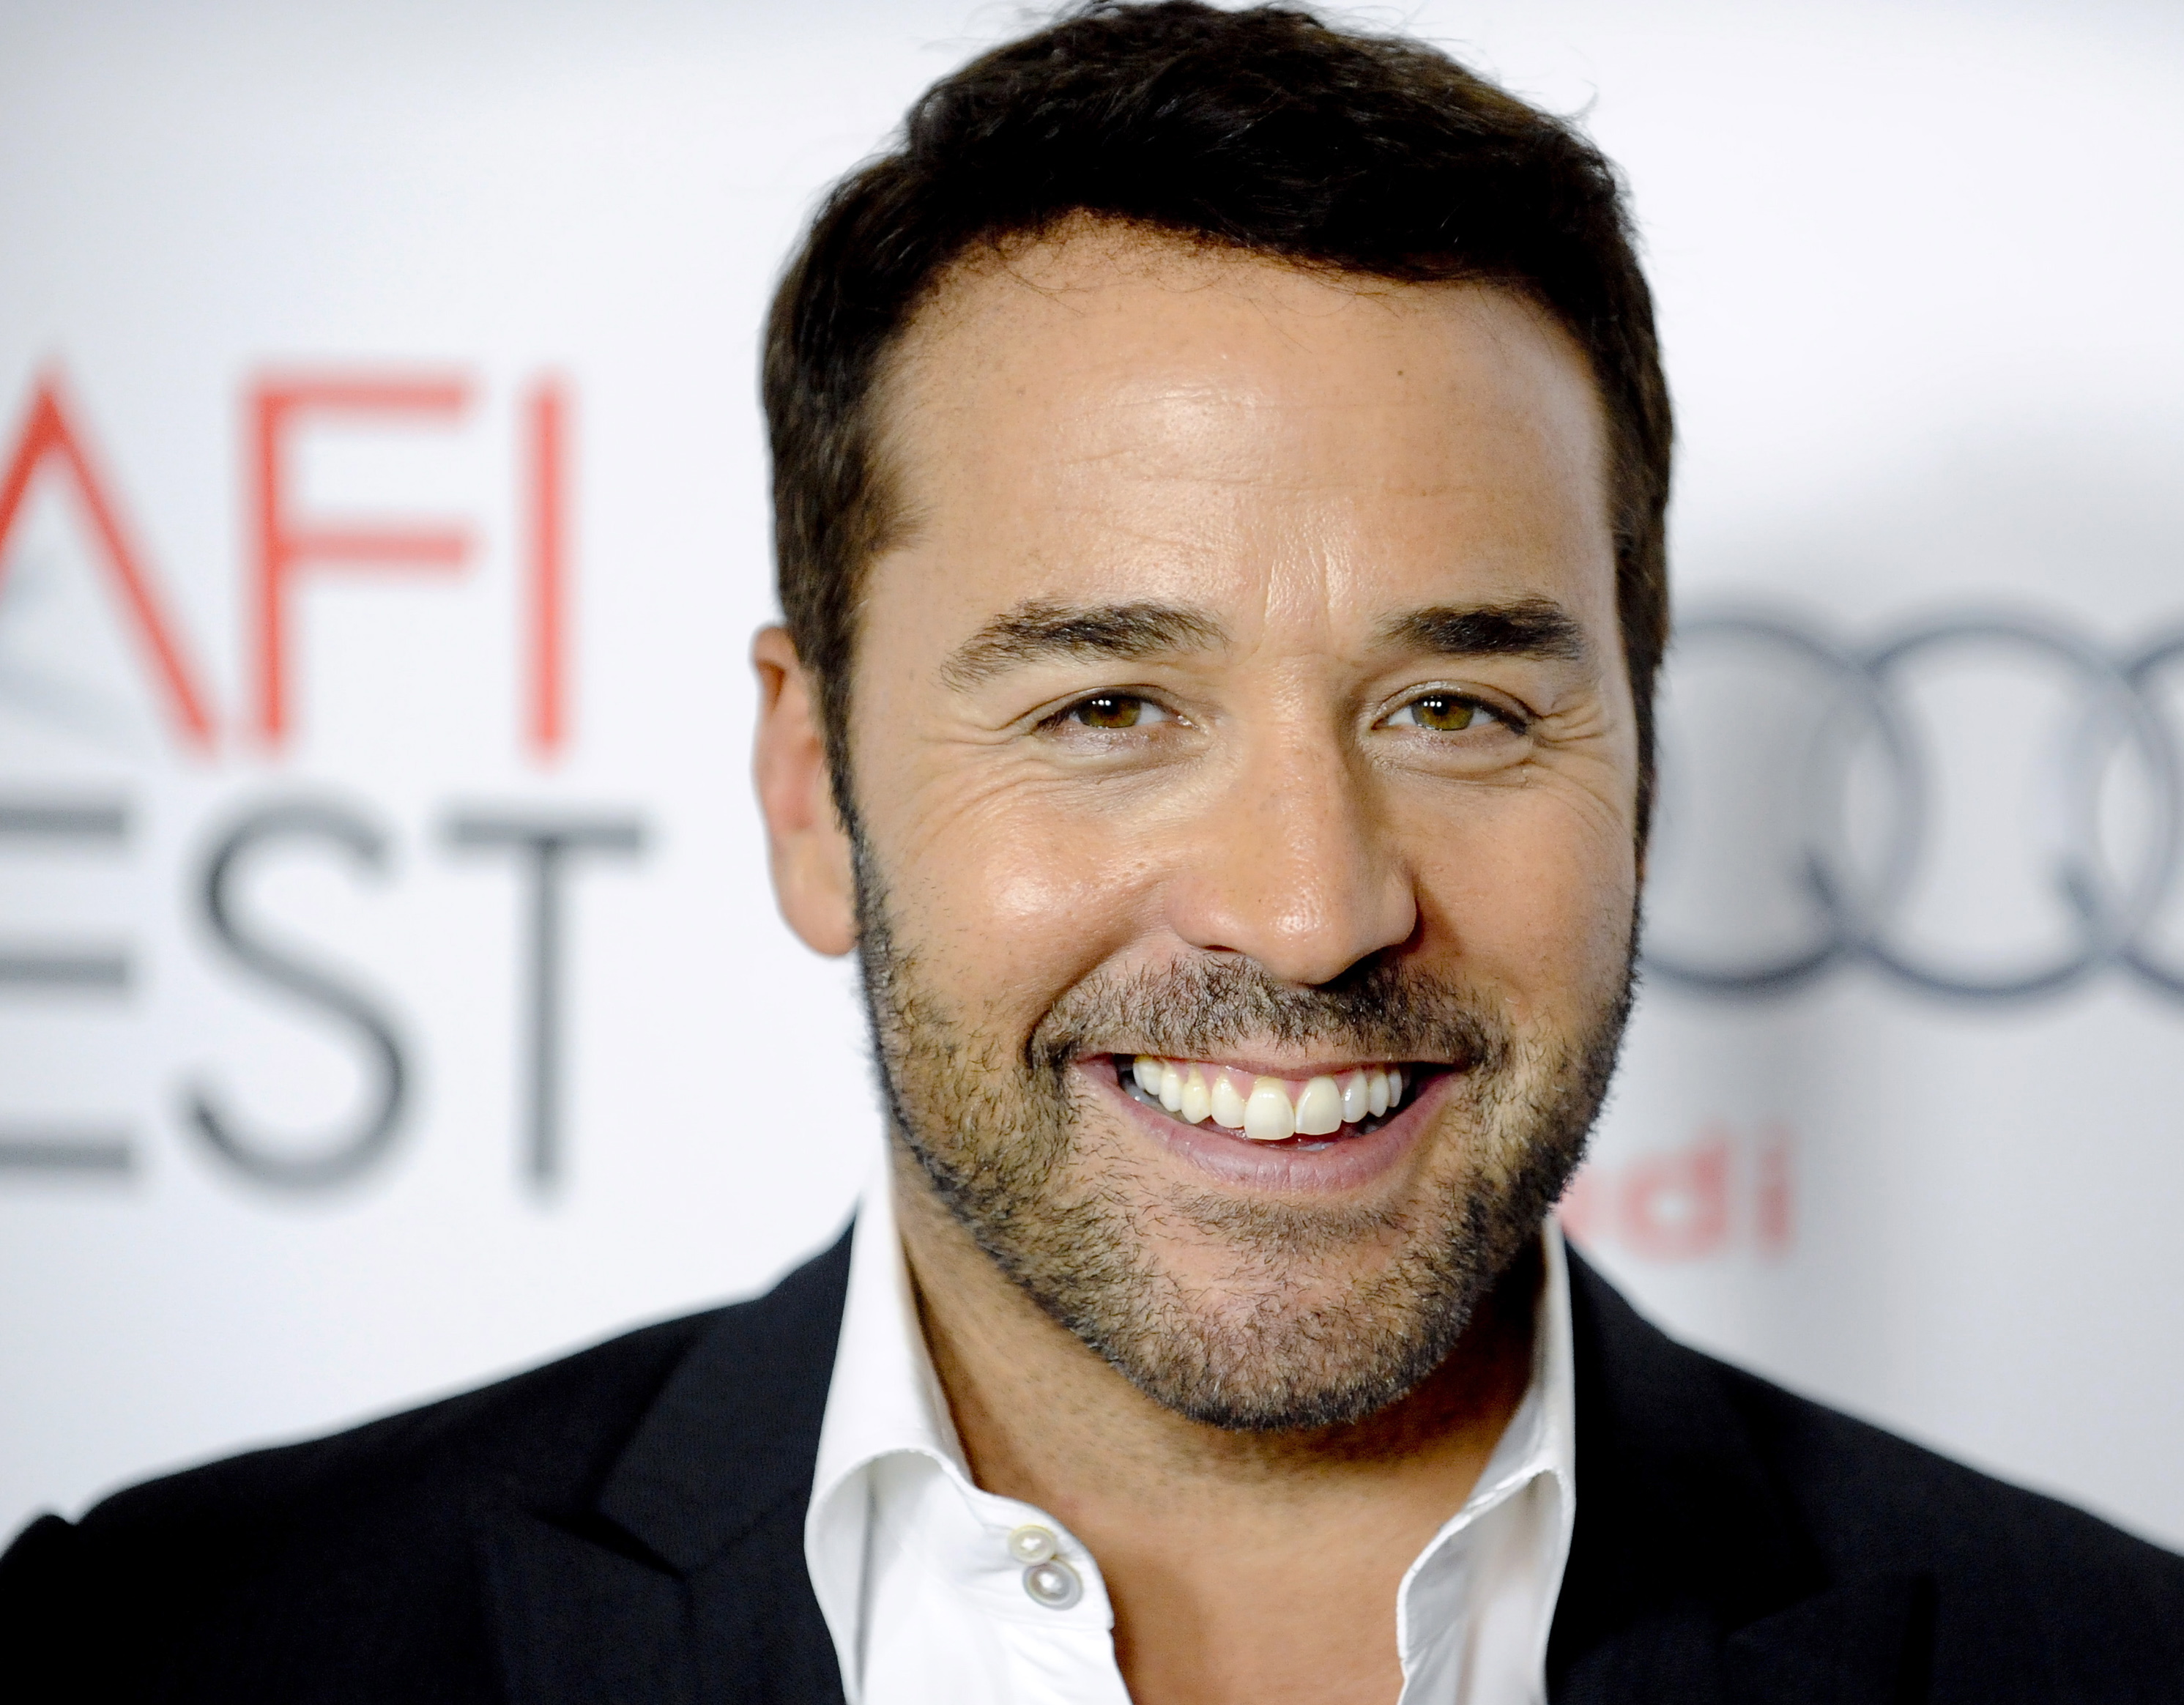 2. Jeremy Piven - Worst Tipper - Piven visited a sushi spot in Aspen named Nobu, with twelve guests, unannounced. After the meal, it is reported that Piven said to the manager, "Thanks for nothing" and left a signed ENTOURAGE DVD for a tip. Apparently, the server was so mad he hurled the DVD at Piven as he walked out. What a pile. 
